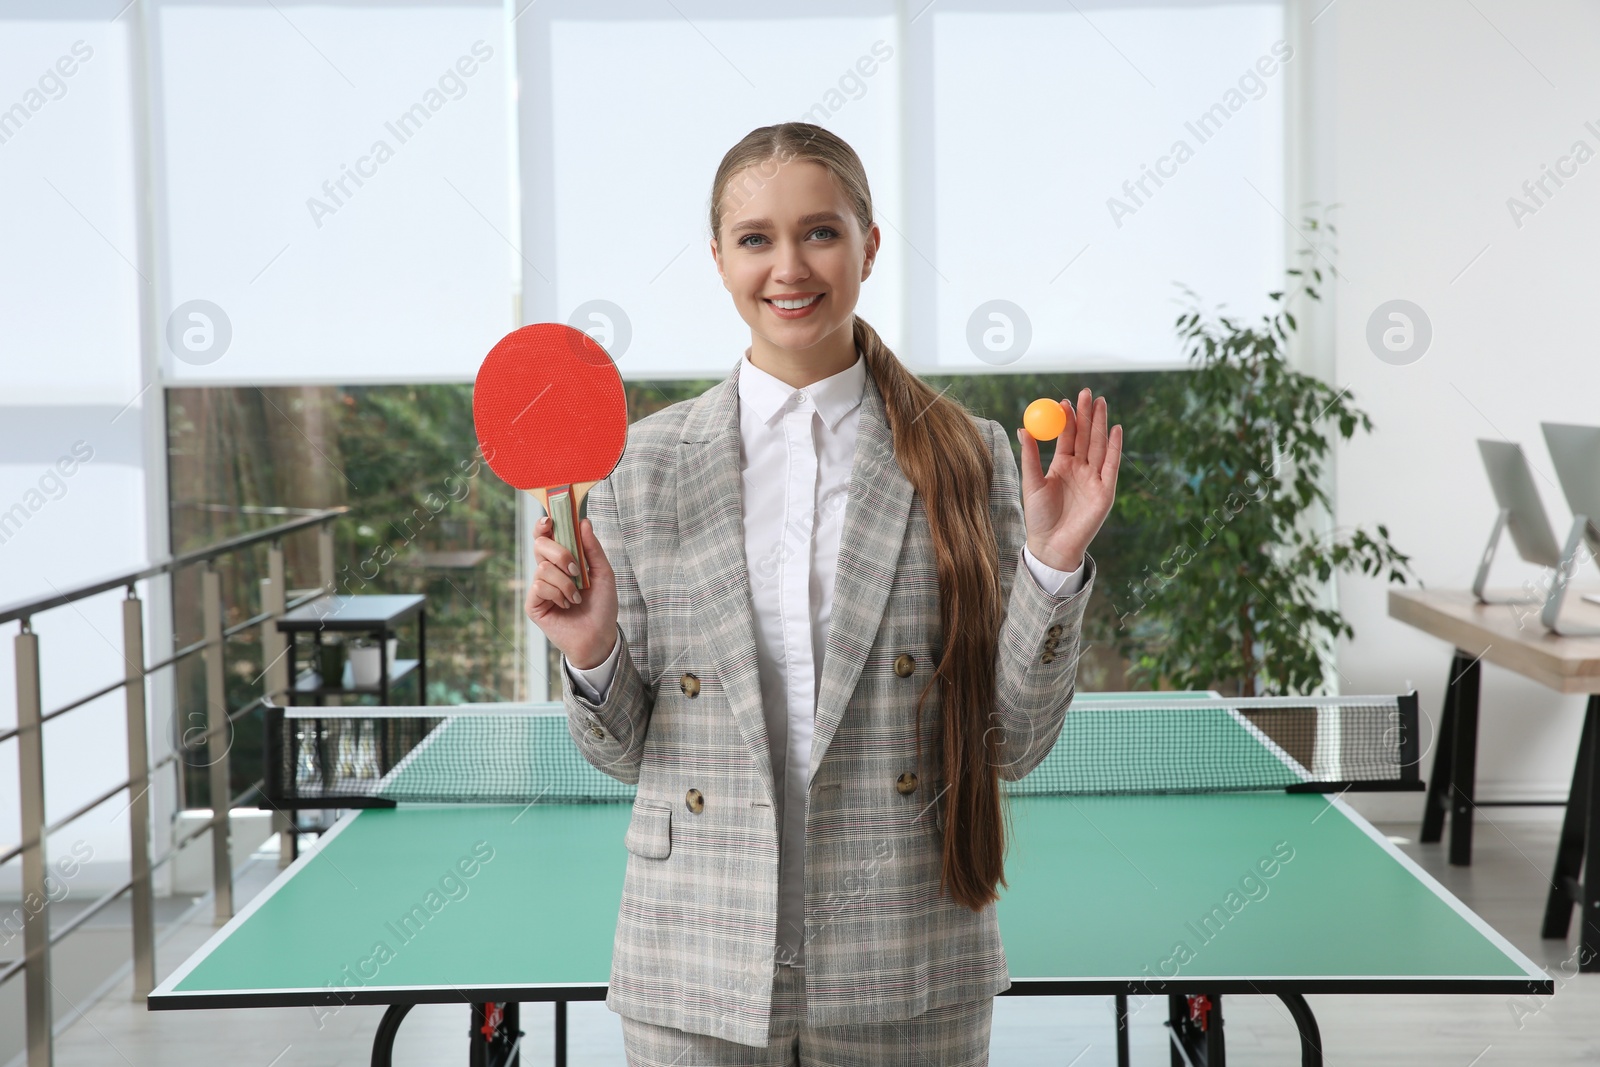 Photo of Business woman with tennis racket and ball near ping pong table in office